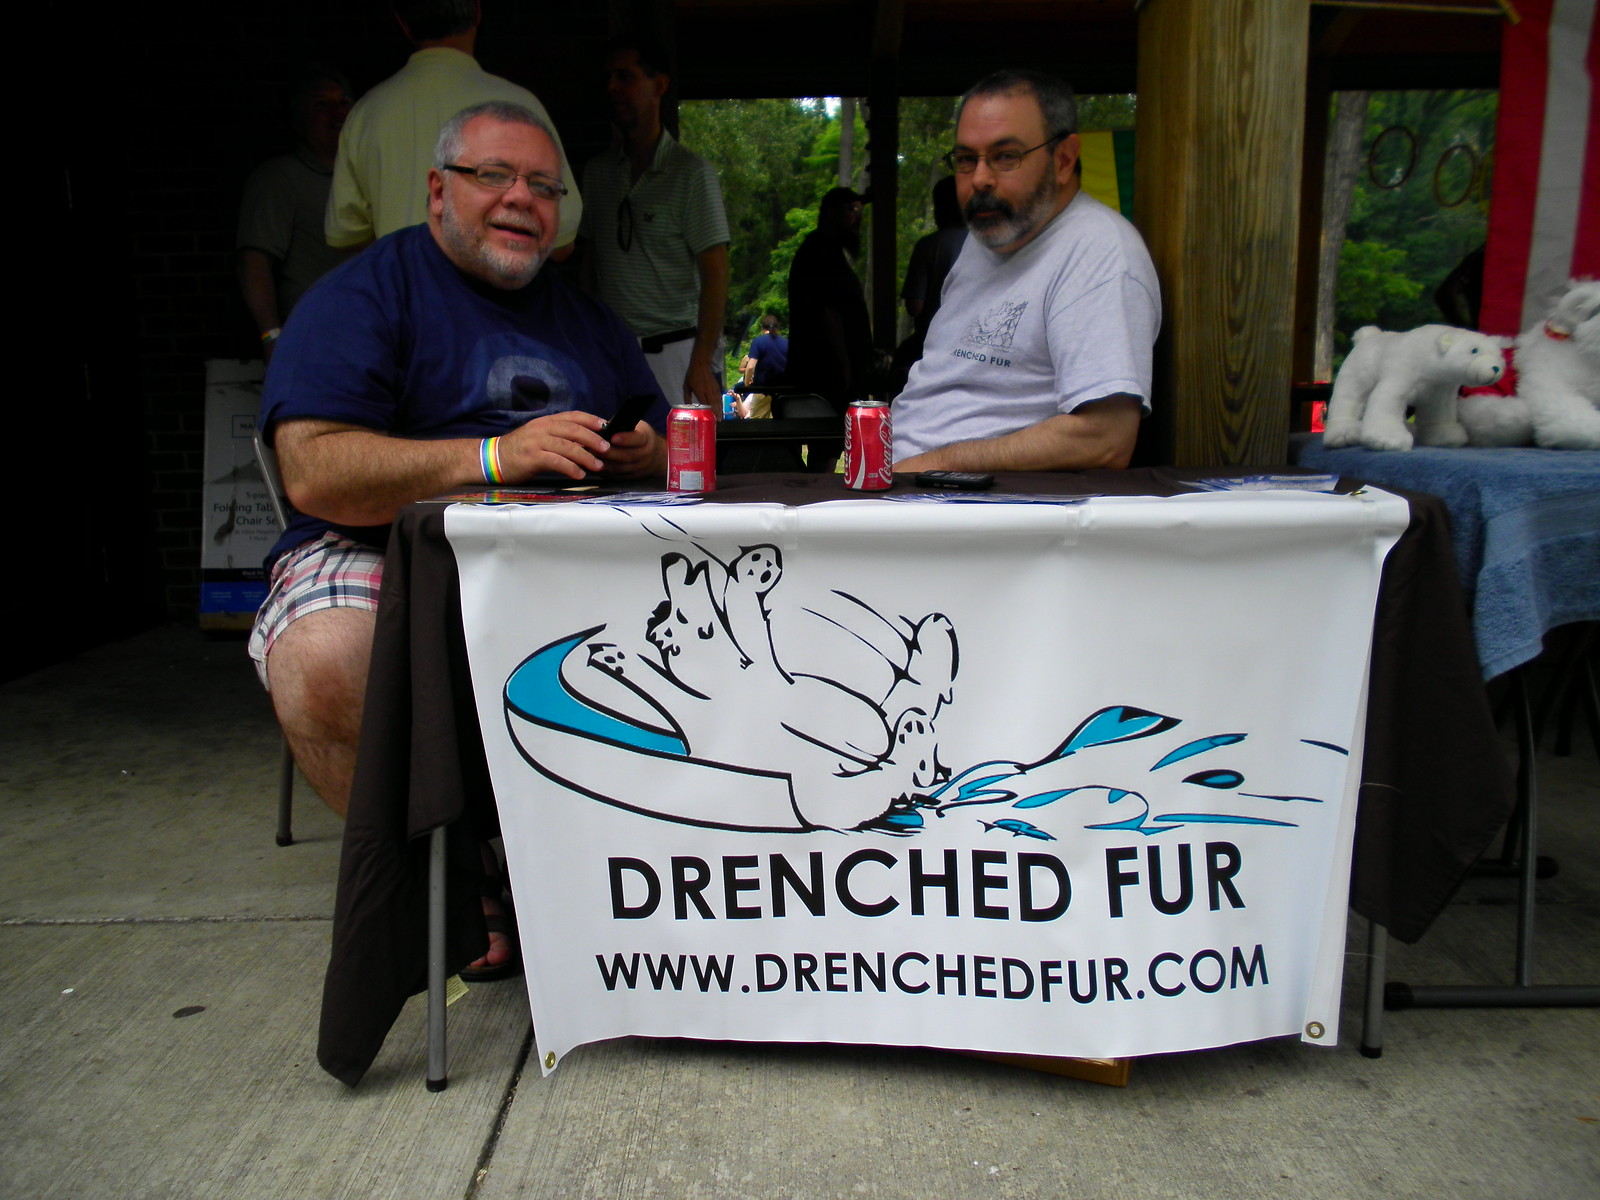 Peter and Chris at the Drenched Fur info table. Photo by Deb Spilko.